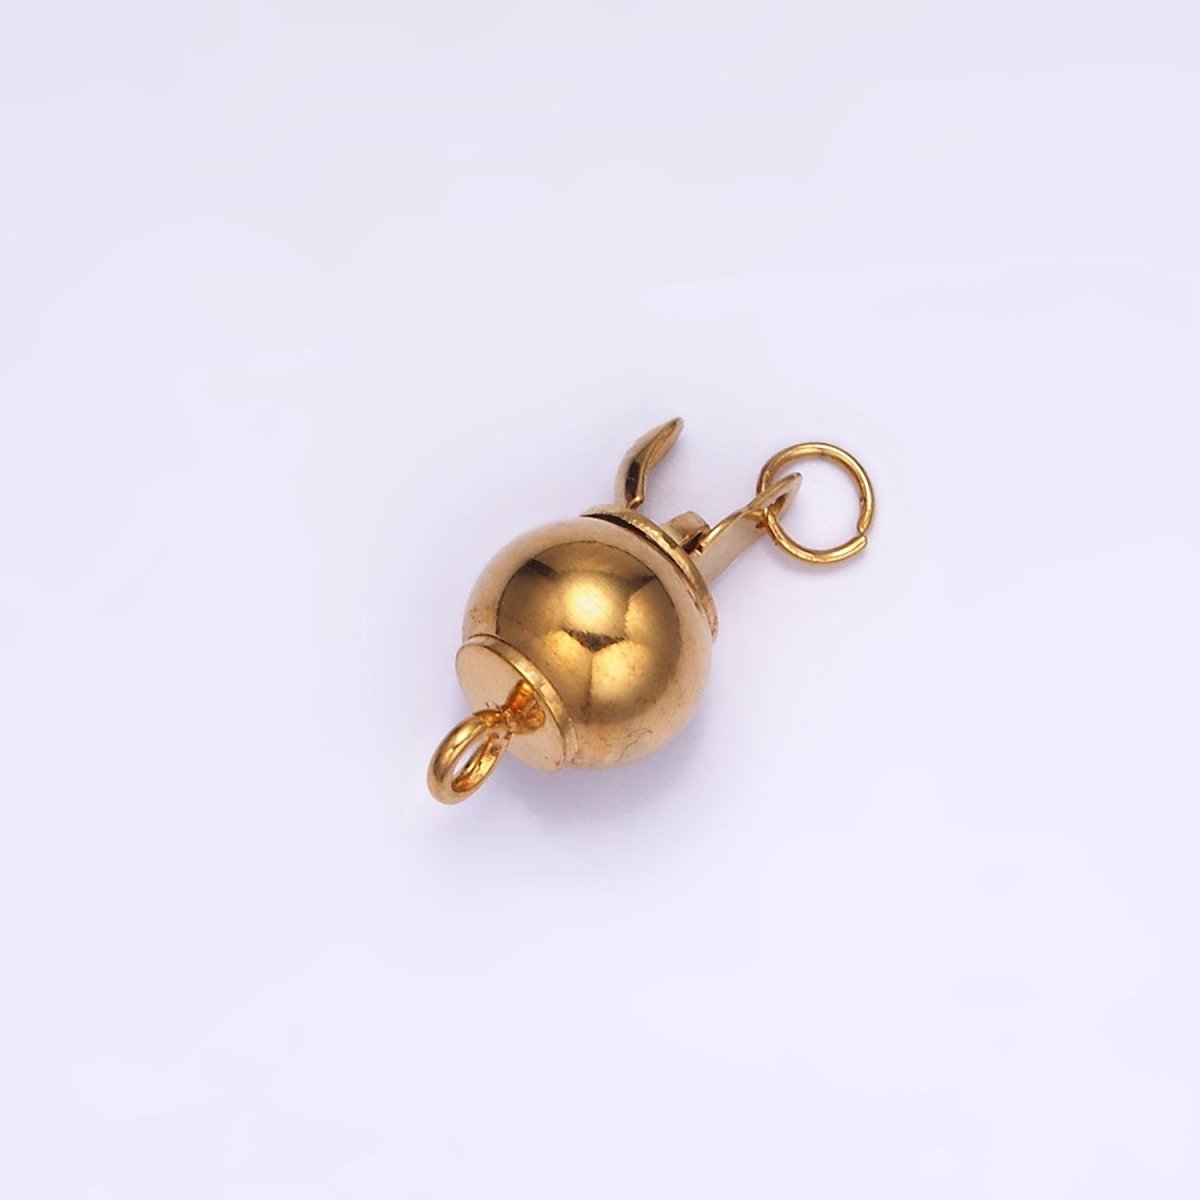 Gold Stainless Steel Ball Clasp with Ring for Necklace Bracelet Jewelry Making Smooth Ball Closure Connector Push in Lock End Clasp Z662 - DLUXCA